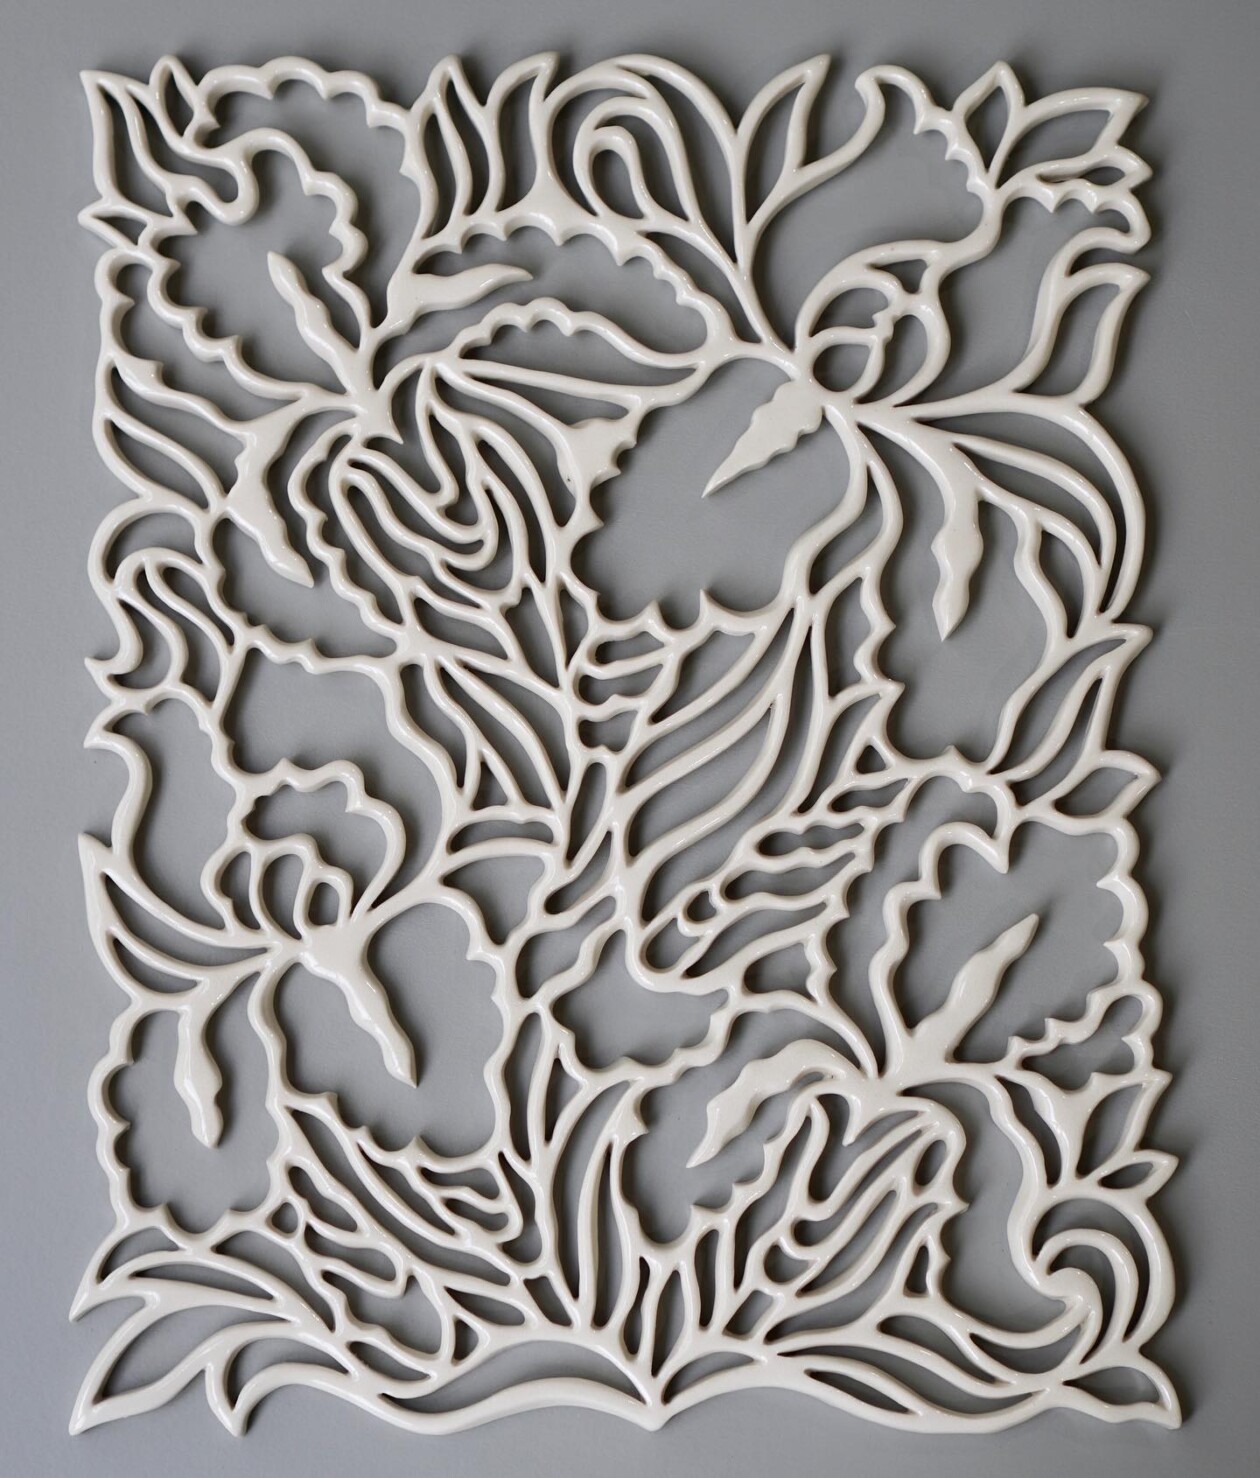 Detailed Hand Carved Porcelain Pieces By Annie Quigley (7)